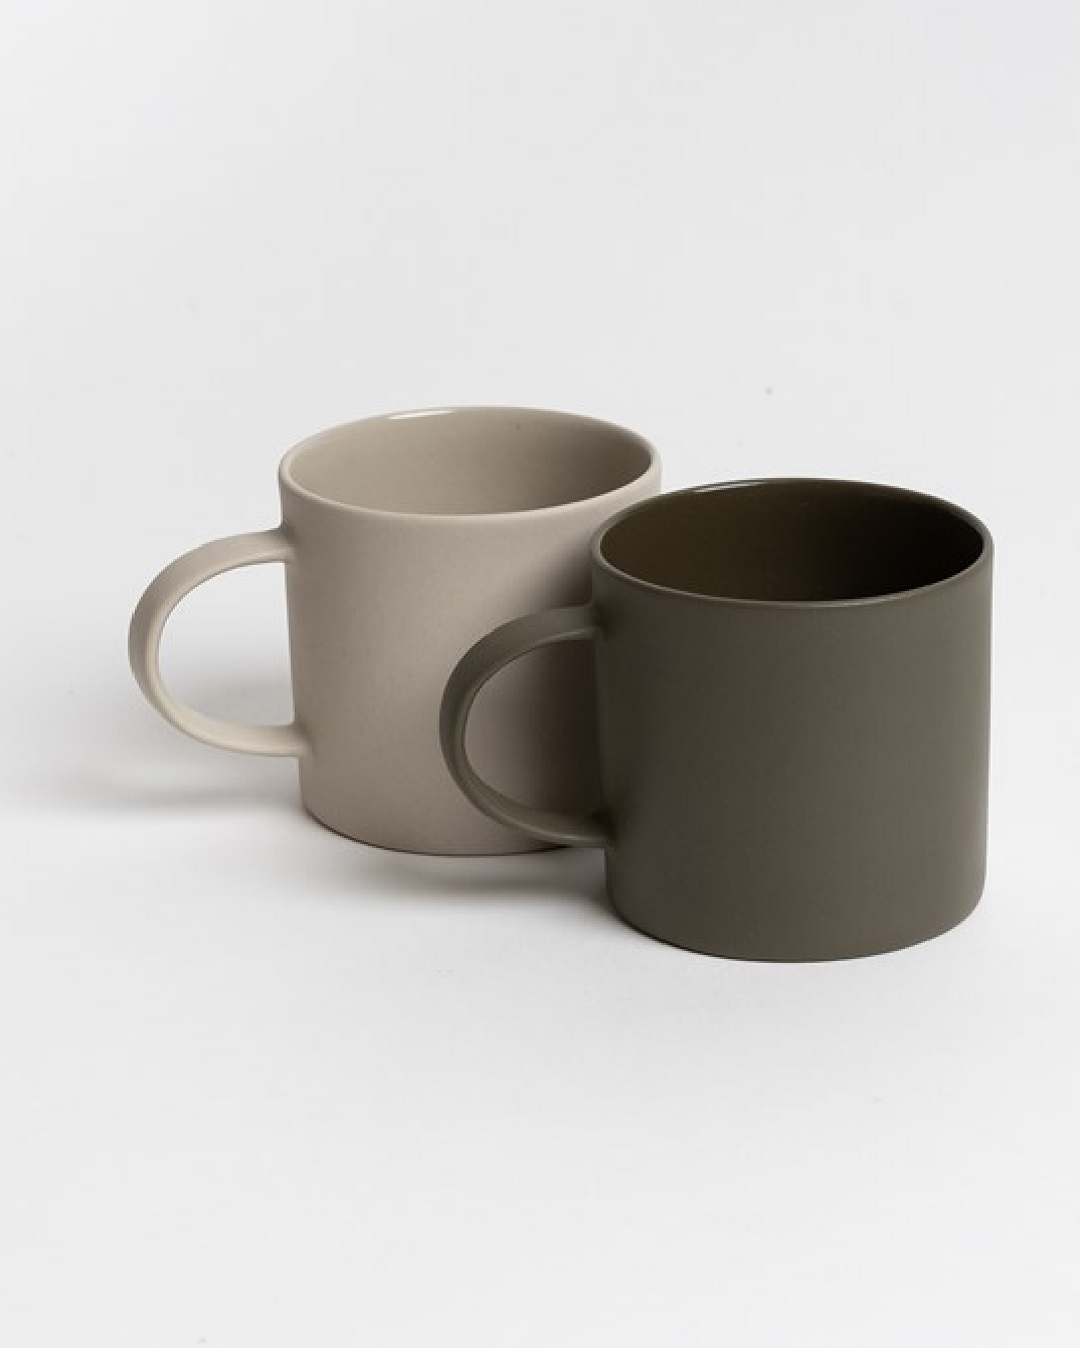 Cashmere and olive green mugs